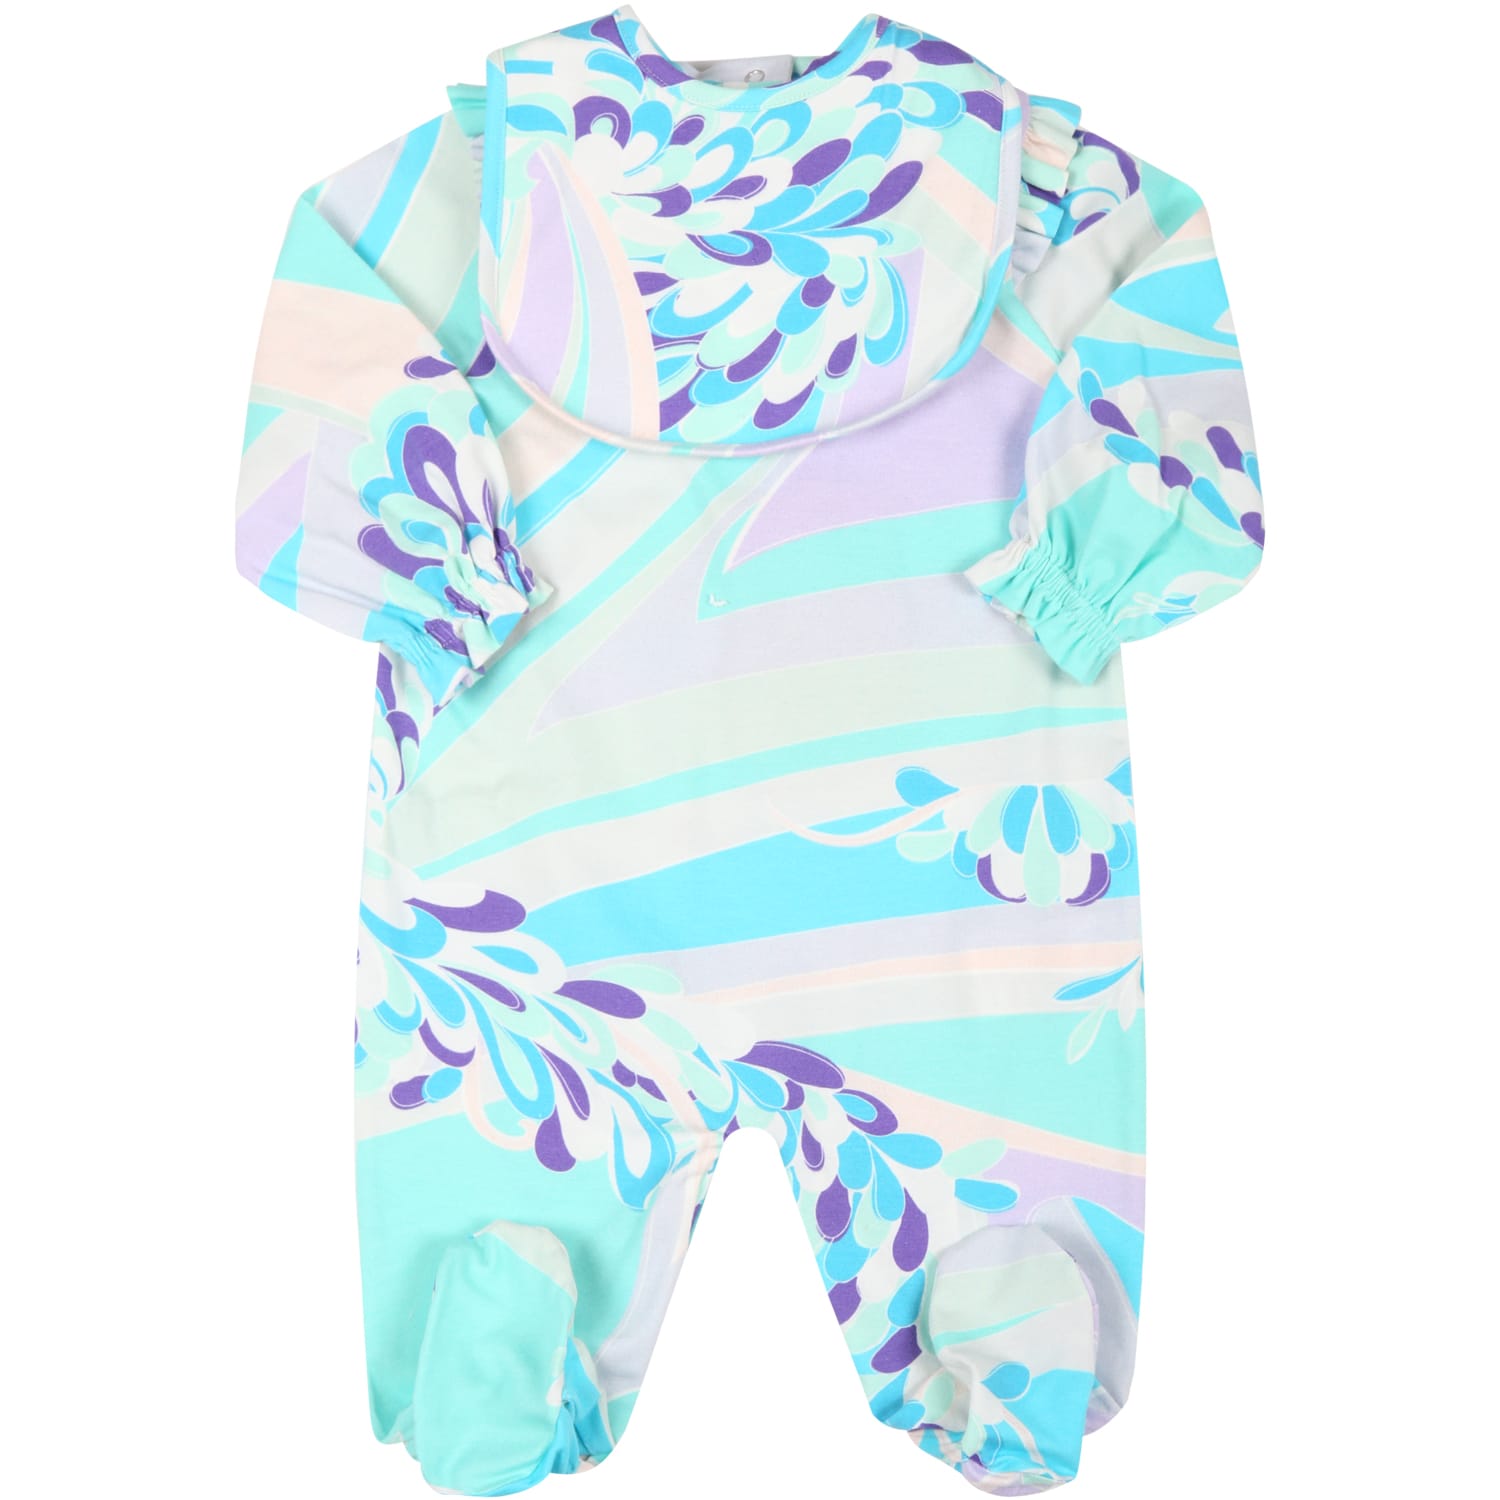 Emilio Pucci Light Blue Set For Baby Girl With Iconic Print